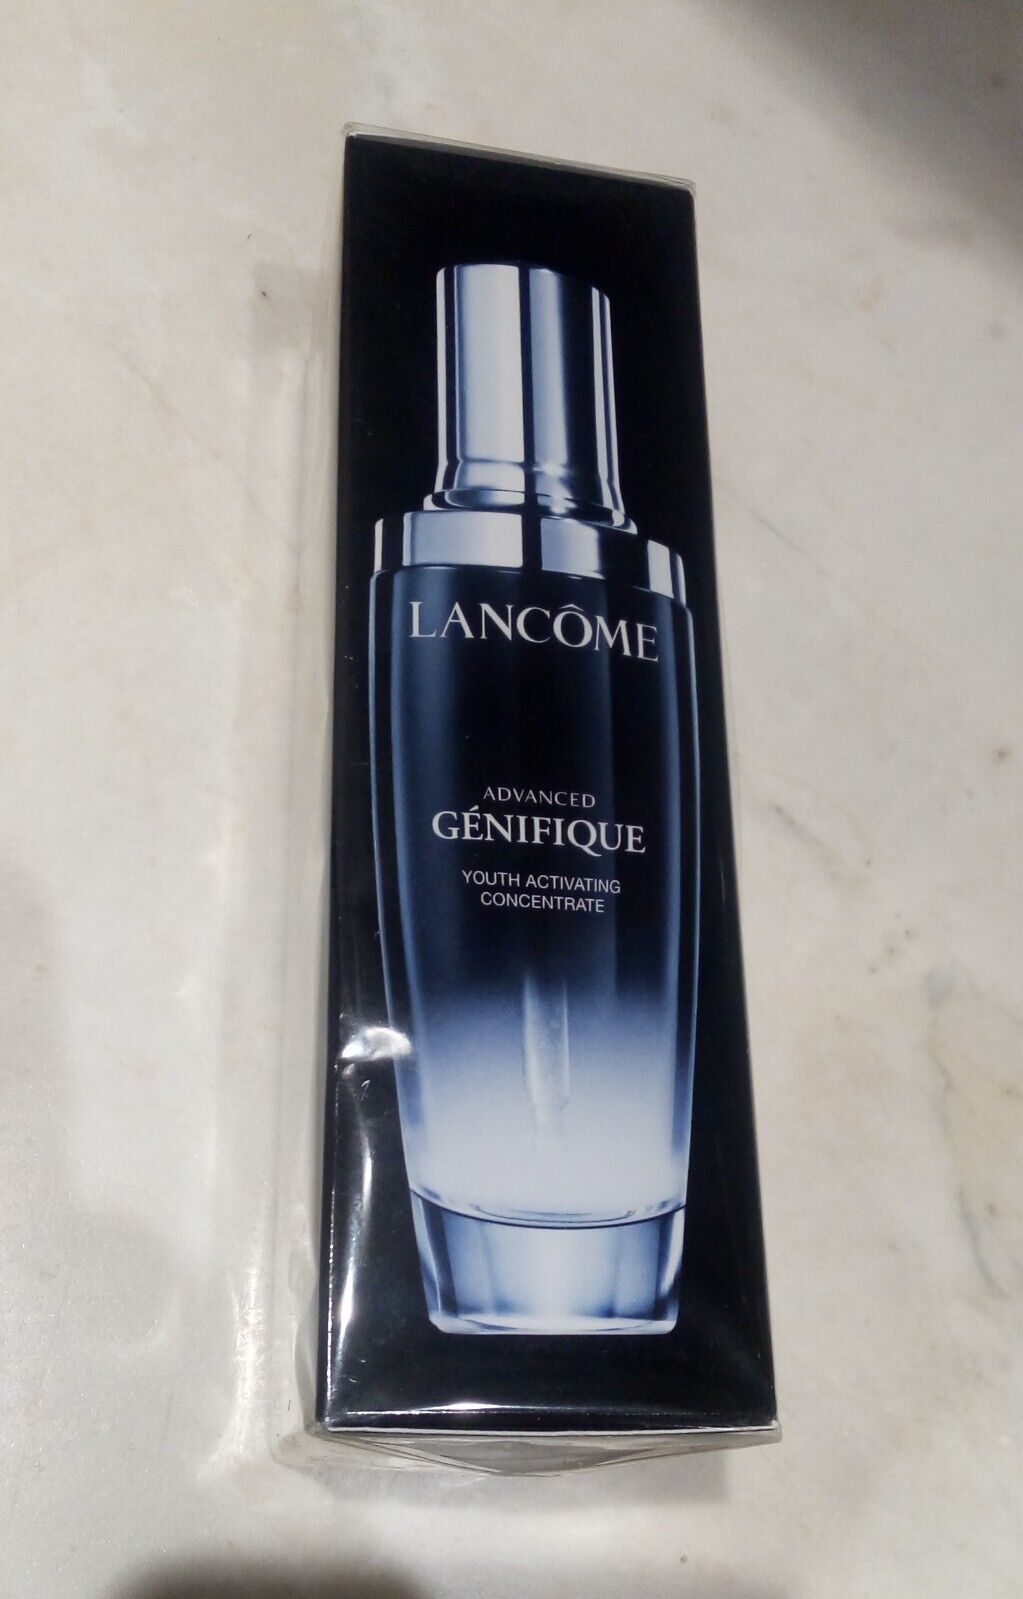 LANCOME Advanced Genifique 50 ml Youth Activating Concentrate NEW IN BOX!